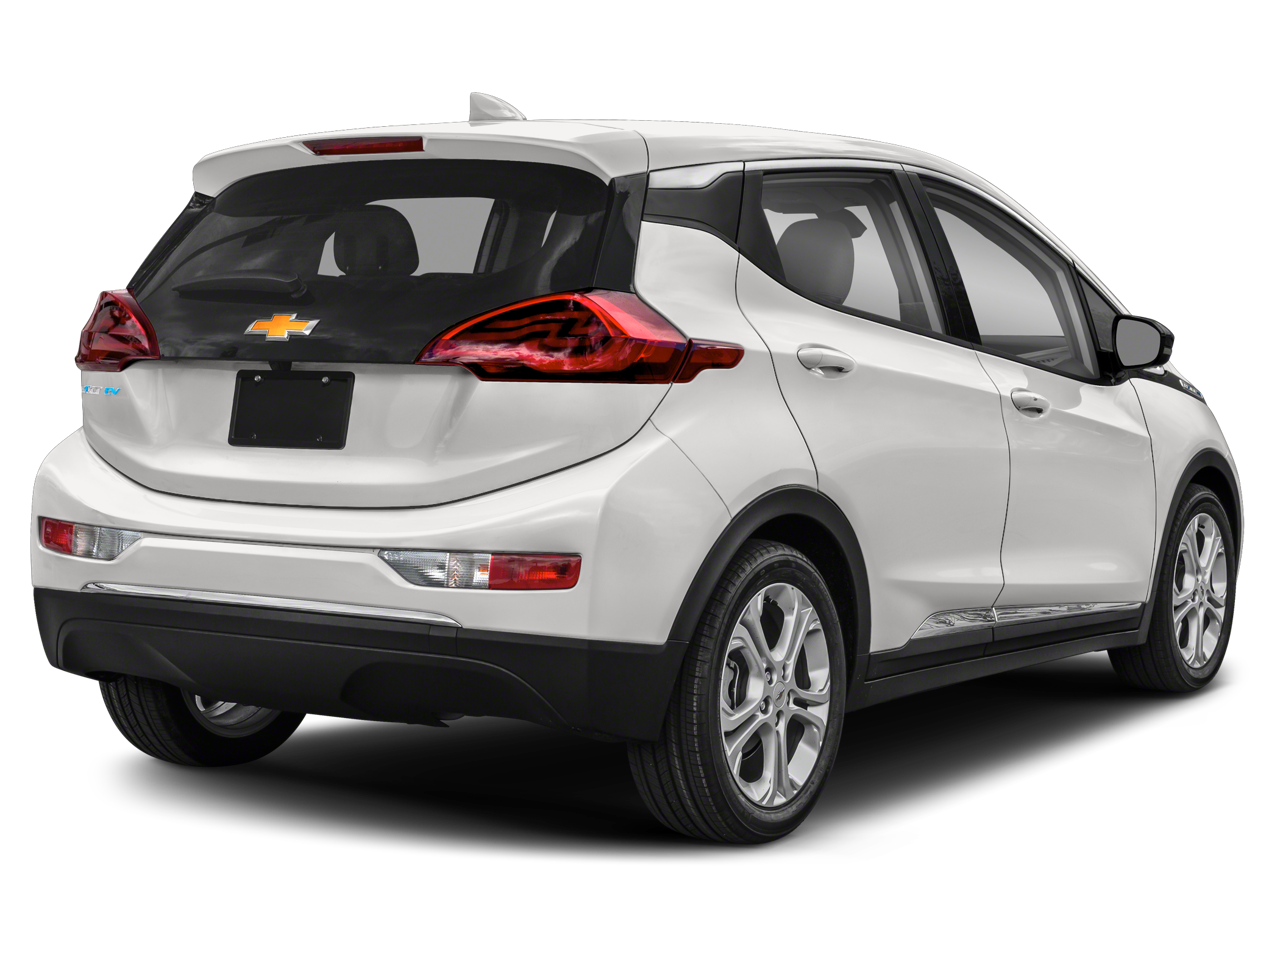 Used 2021 Chevrolet Bolt EV LT with VIN 1G1FY6S0XM4110631 for sale in Upland, CA